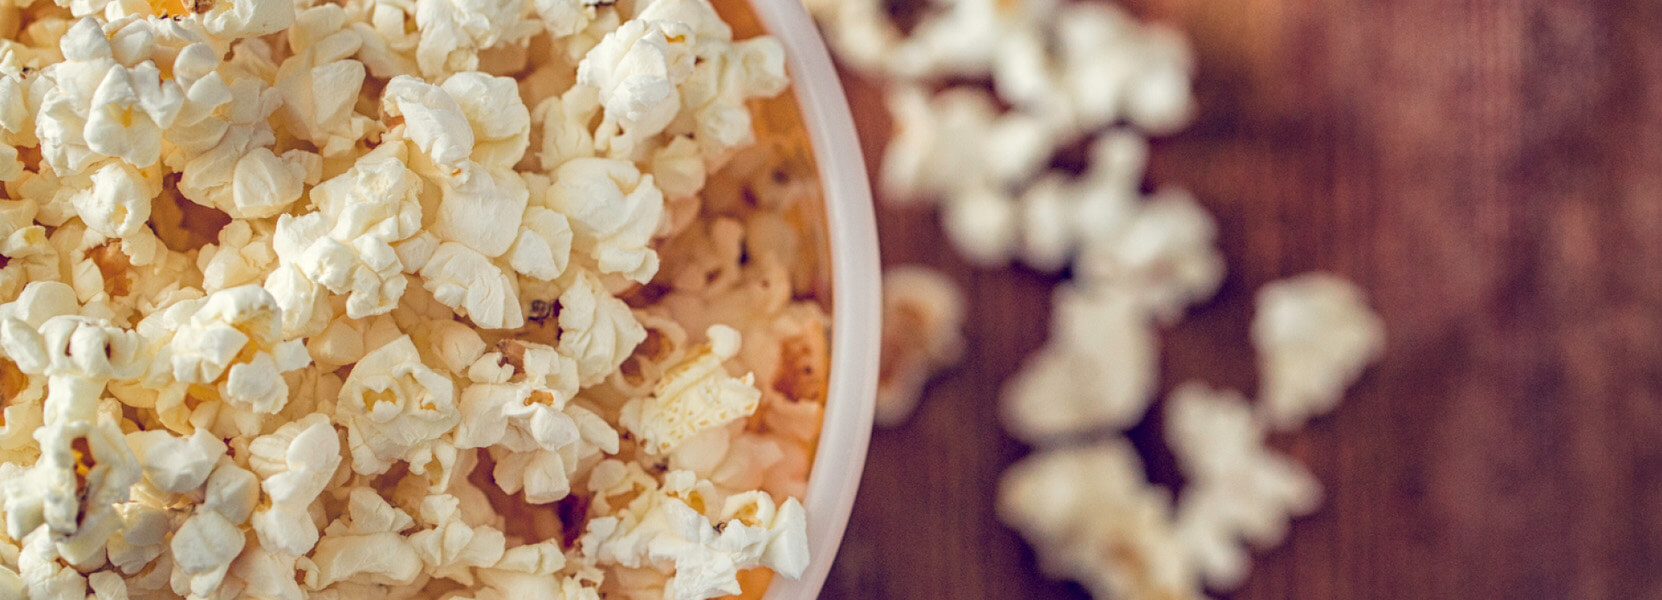 Close up of popcorn in a bowl.